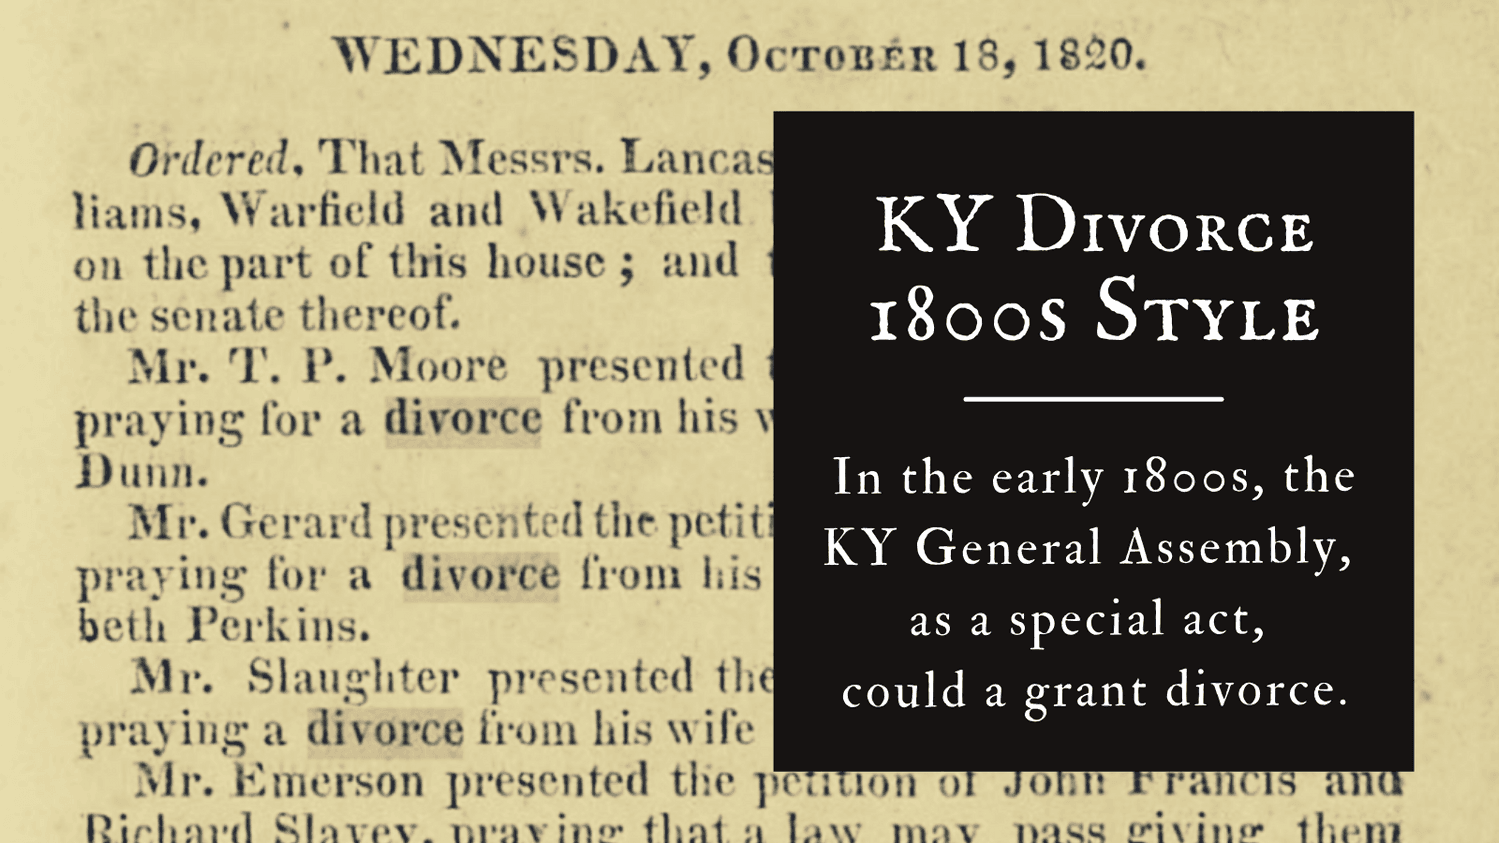 Tips for Researching Divorces in Kentucky of Yesteryear